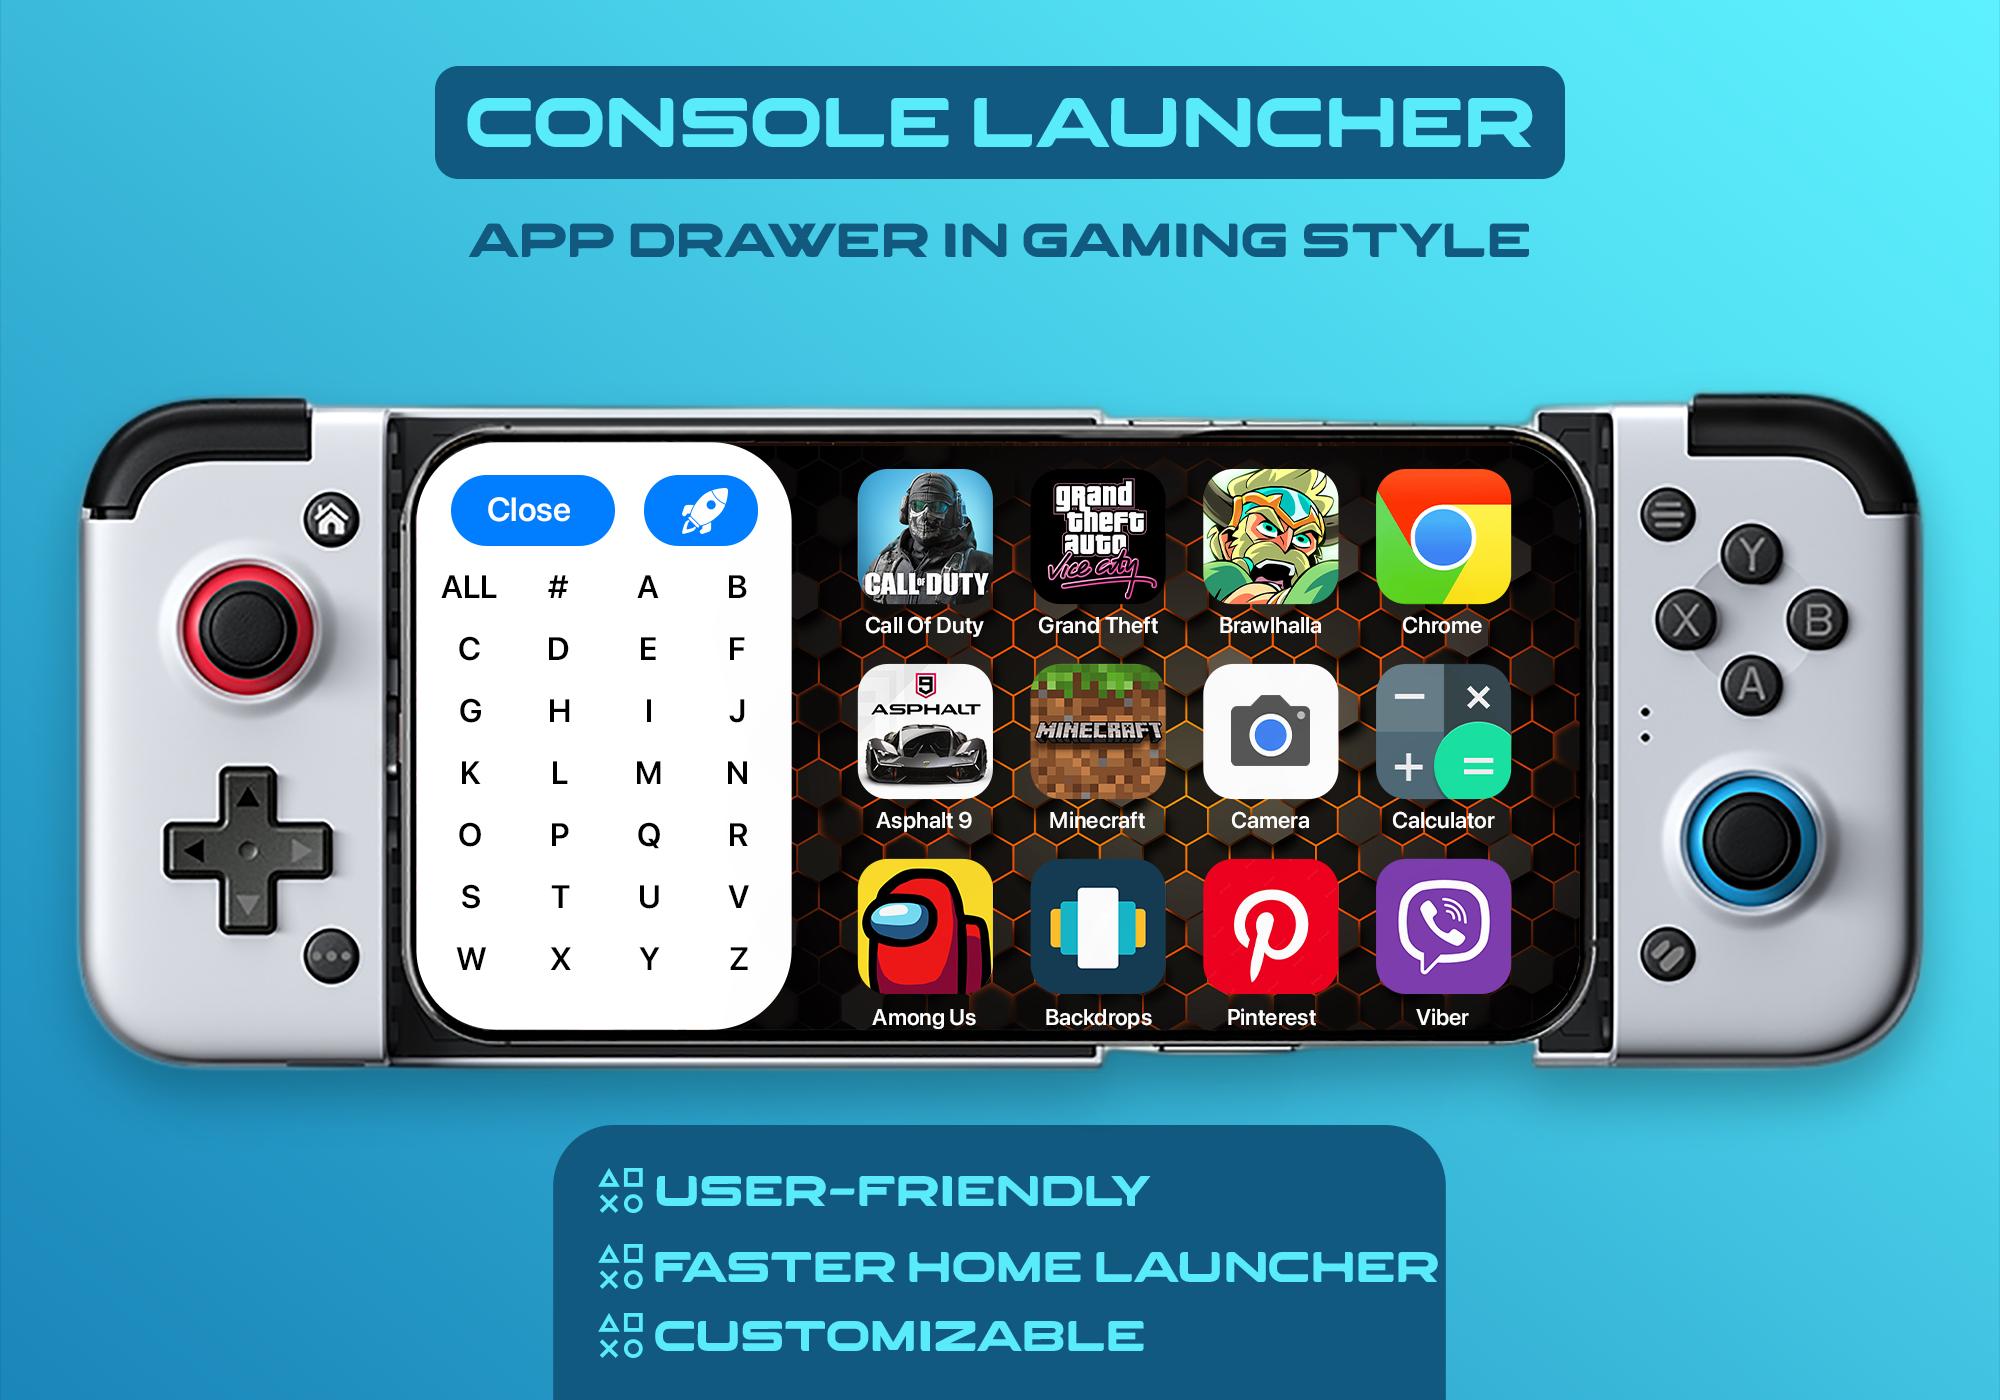 Creative Console Launcher. Status: Launched Consol. Game booster launcher